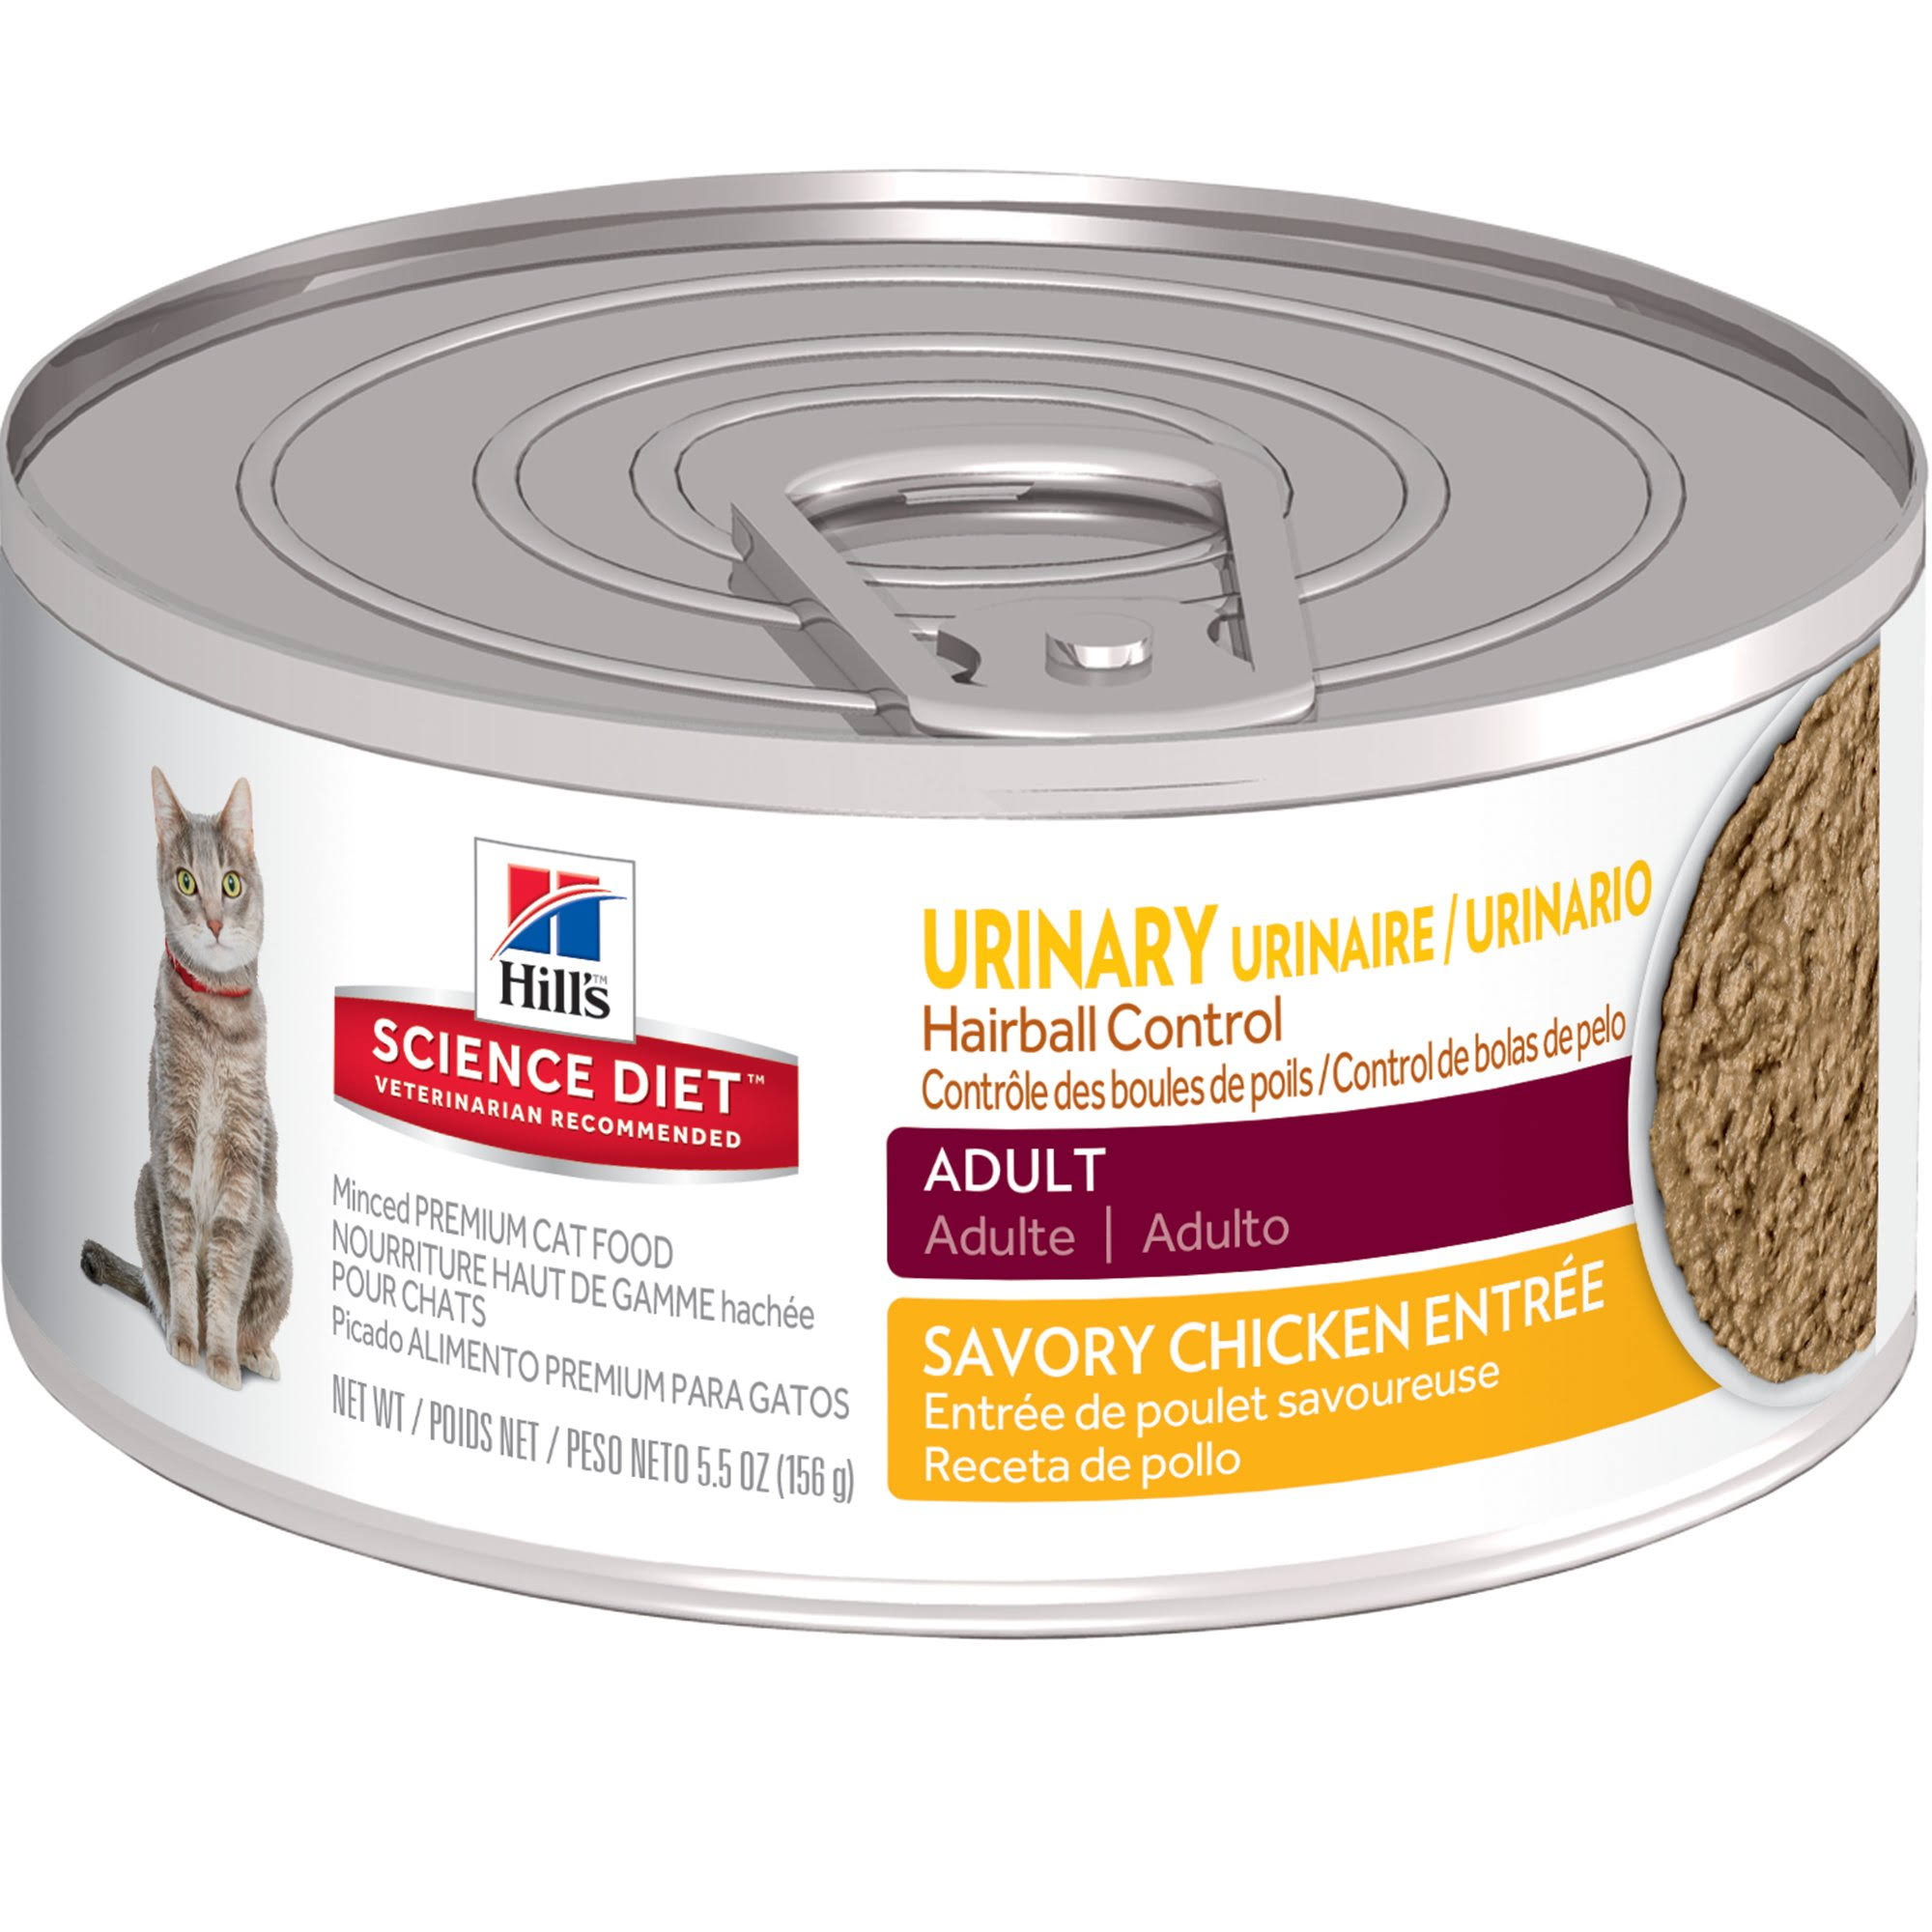 Hills Science Diet Adult Urinary Hairball Control Cat Food - 5.5oz